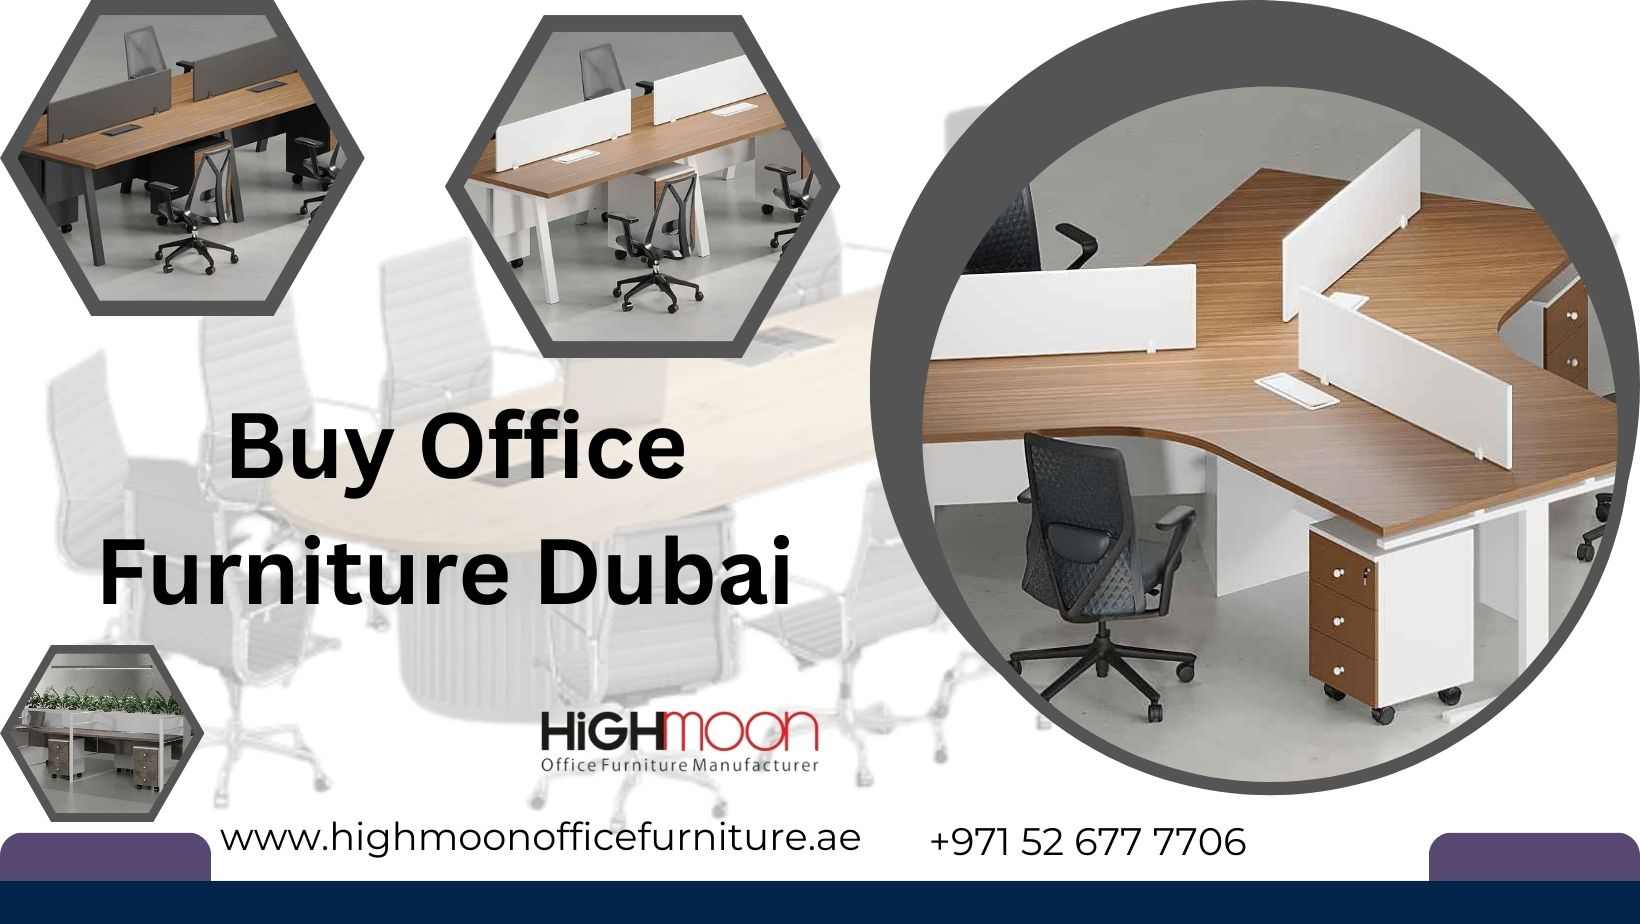 How-to-Buy-Office-Furniture-DubaiEffectively-Under-Budget.jpg